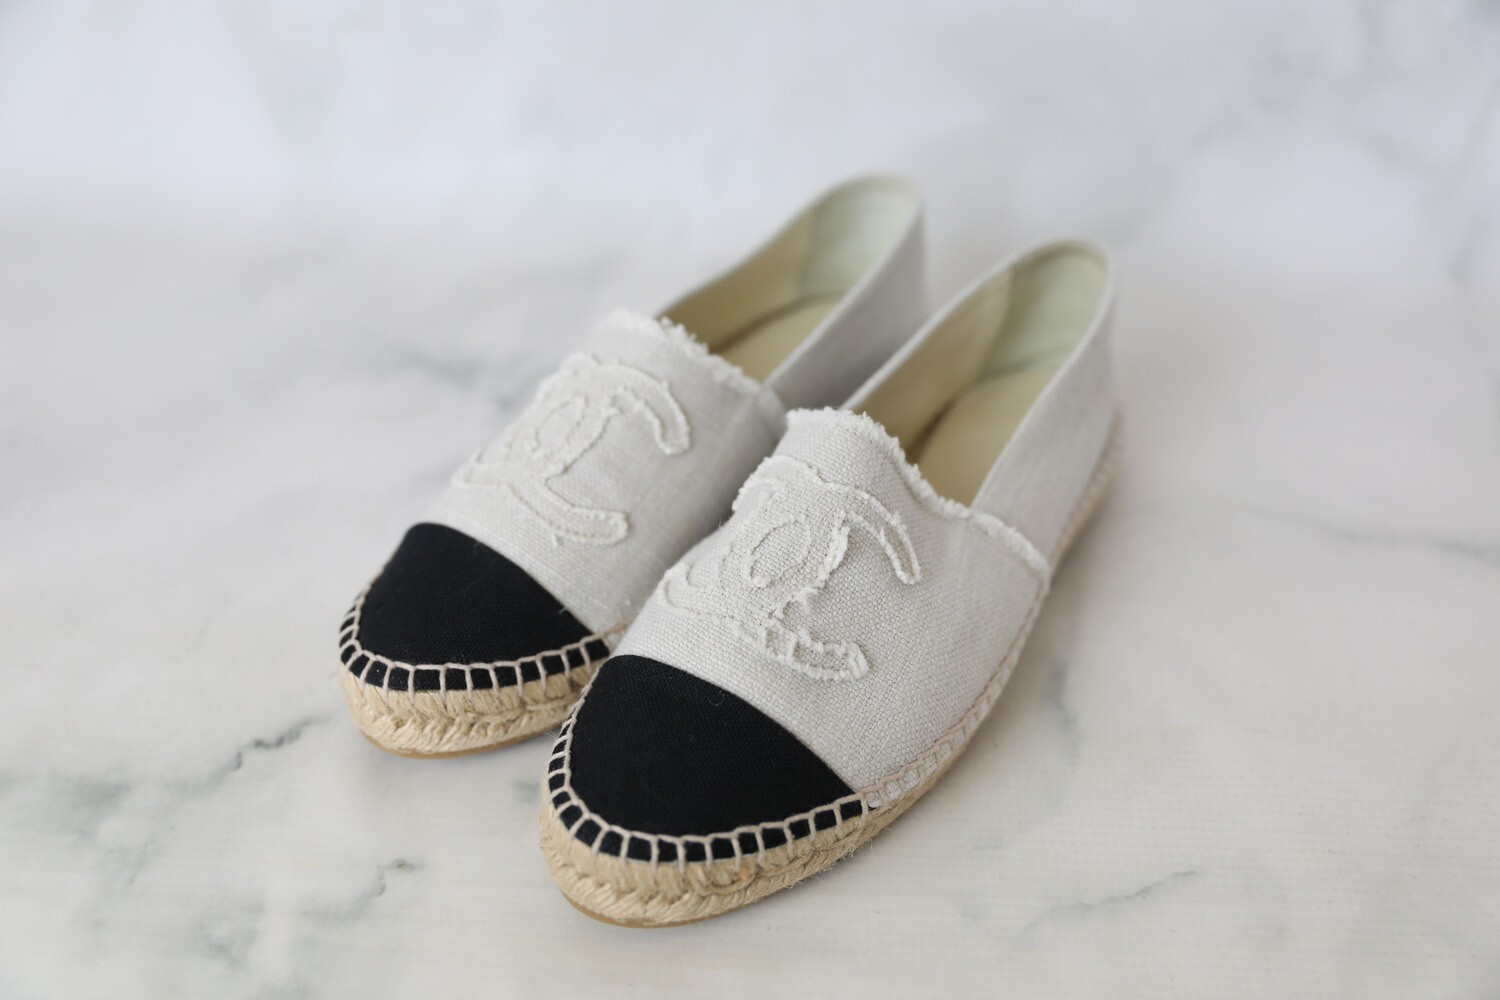 Chanel Shoes Espadrilles, Beige and Black Canvas, Size 37, New in Dustbag  WA001